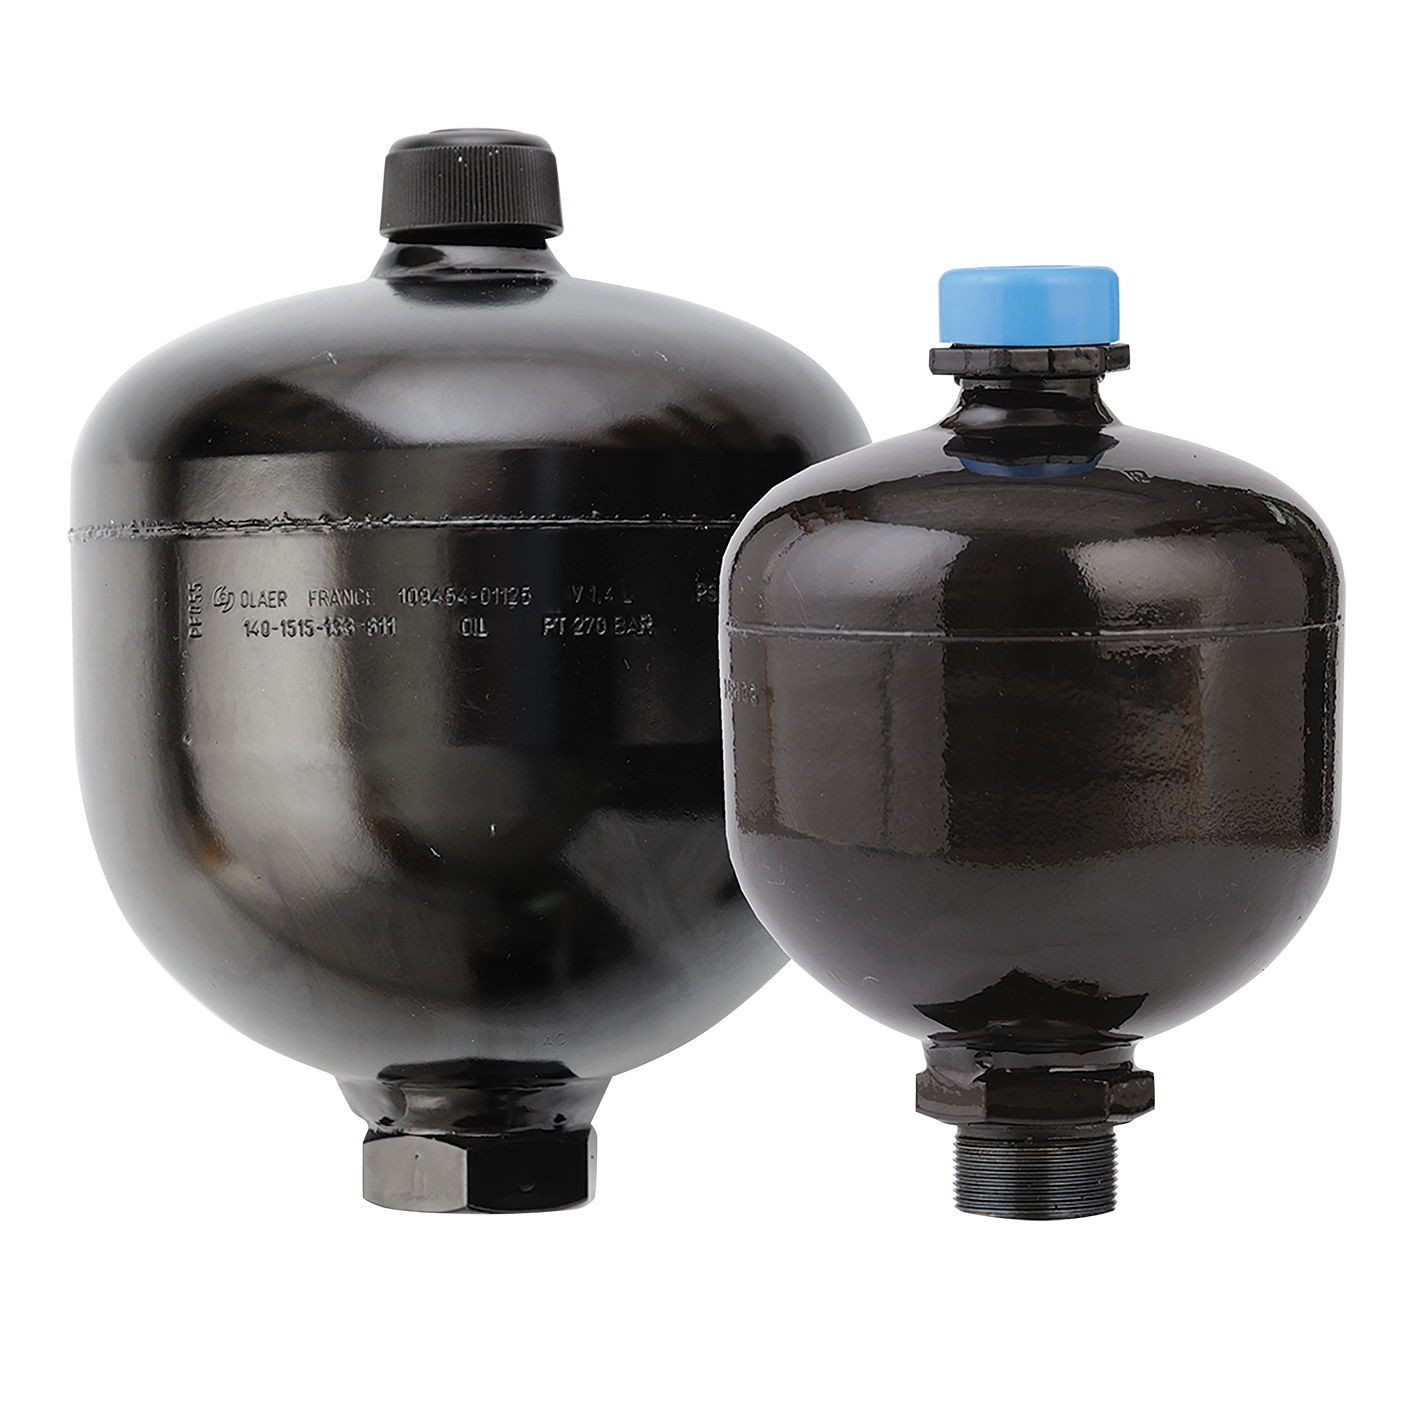 Providers of FCH DIAPHRAGM ACCUM 3.5 LITRES G3/4